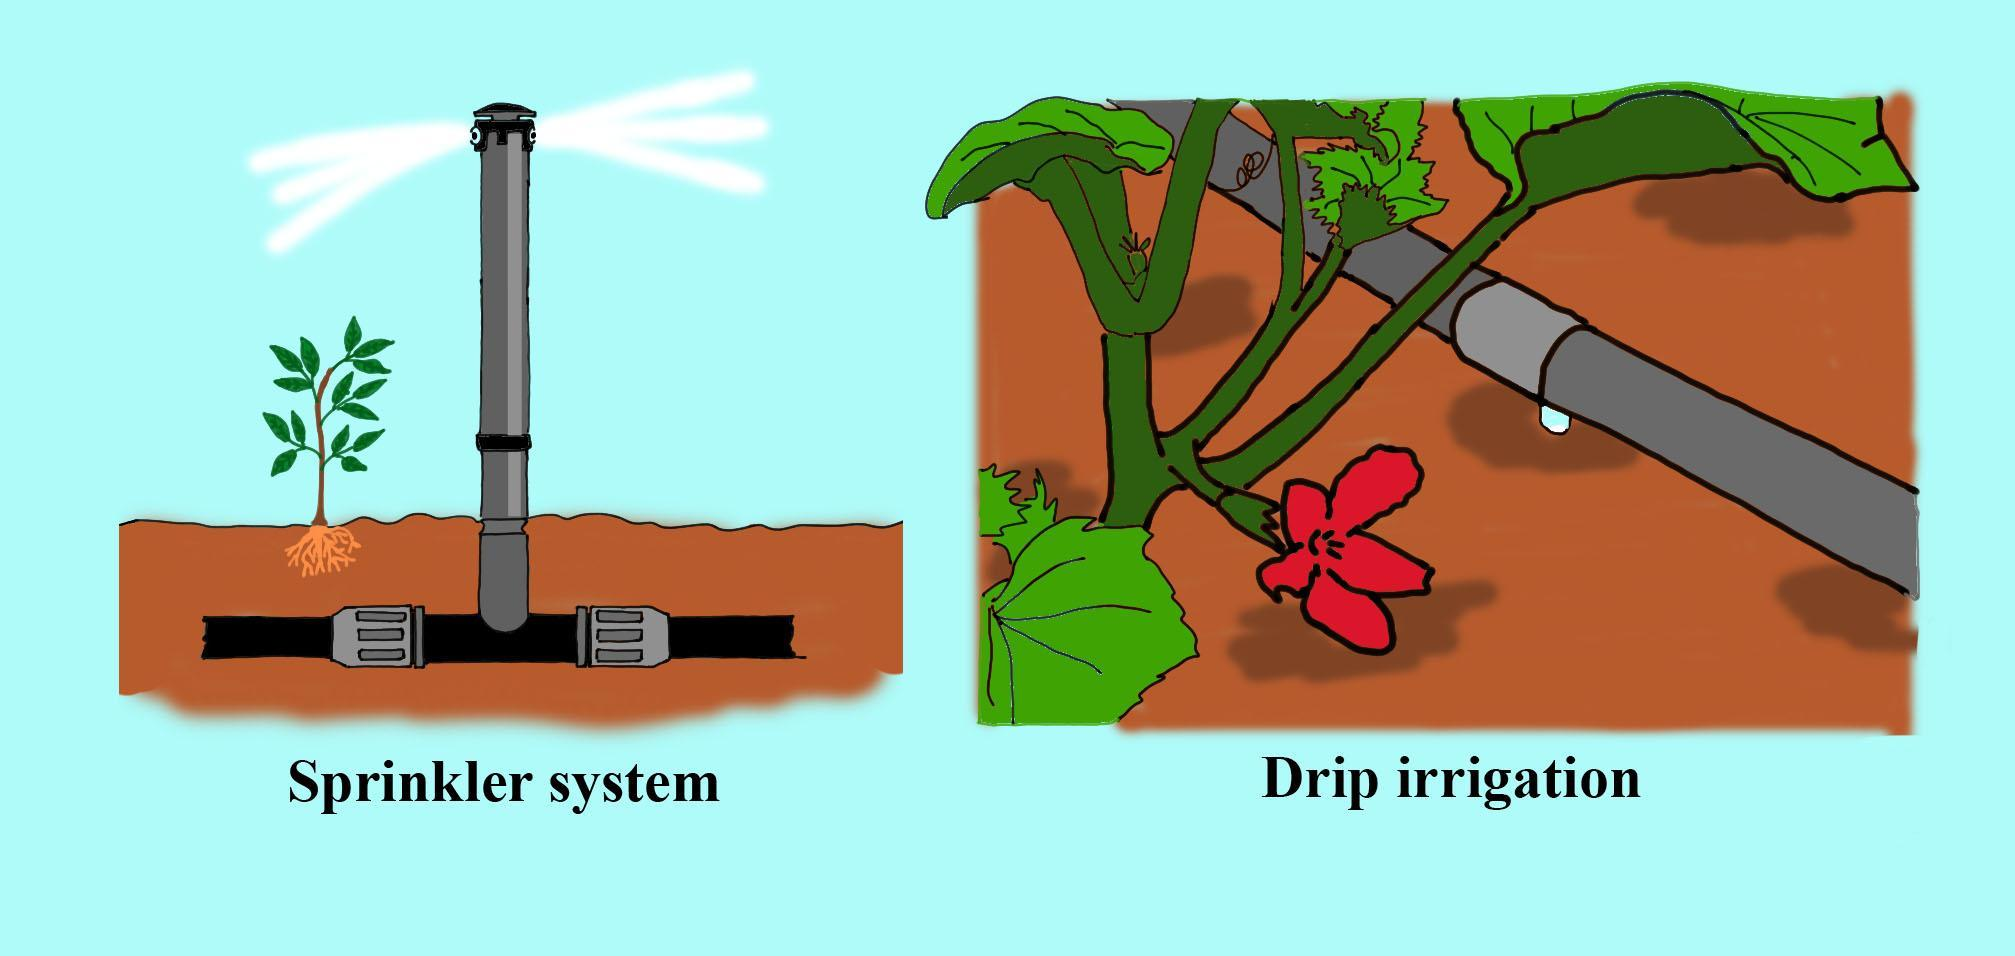 The modern method of irrigation is___________(a) Sprinkler system(b) Drip  system(c) Both A and B(d) None of these